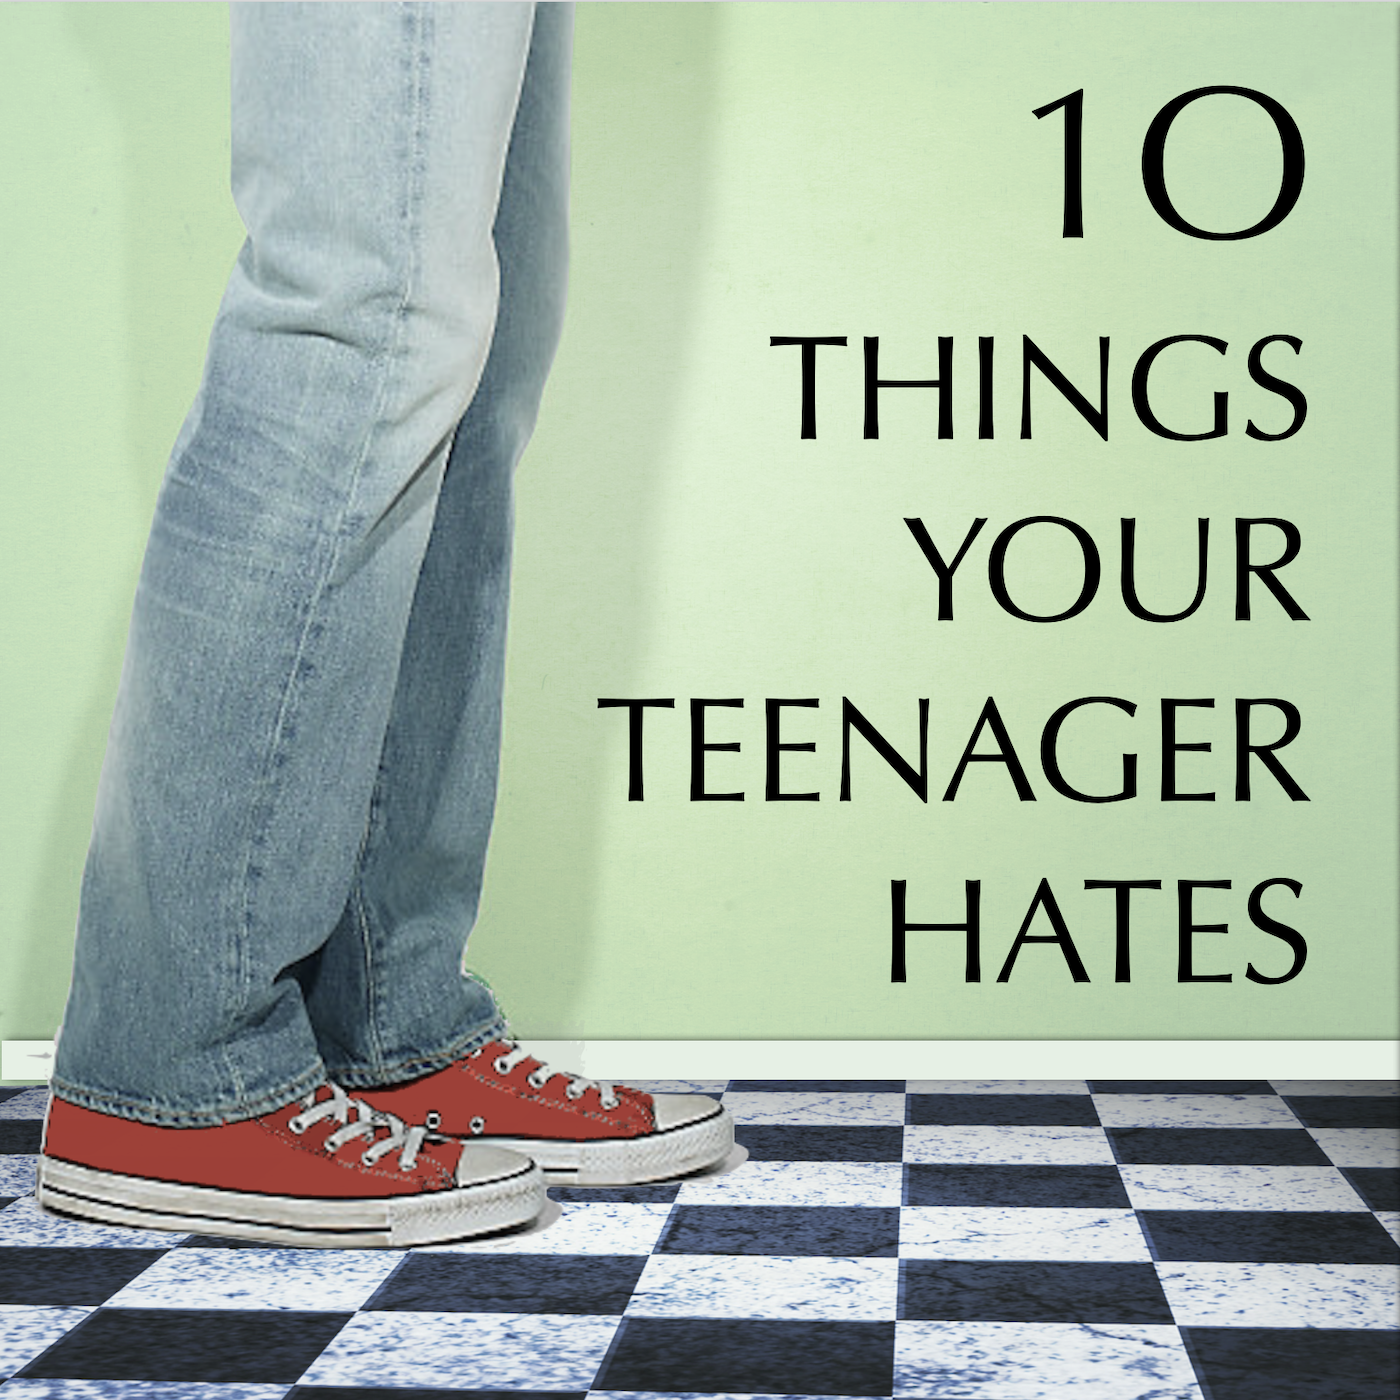 EP 13: 10 Things Your Teenager Hates